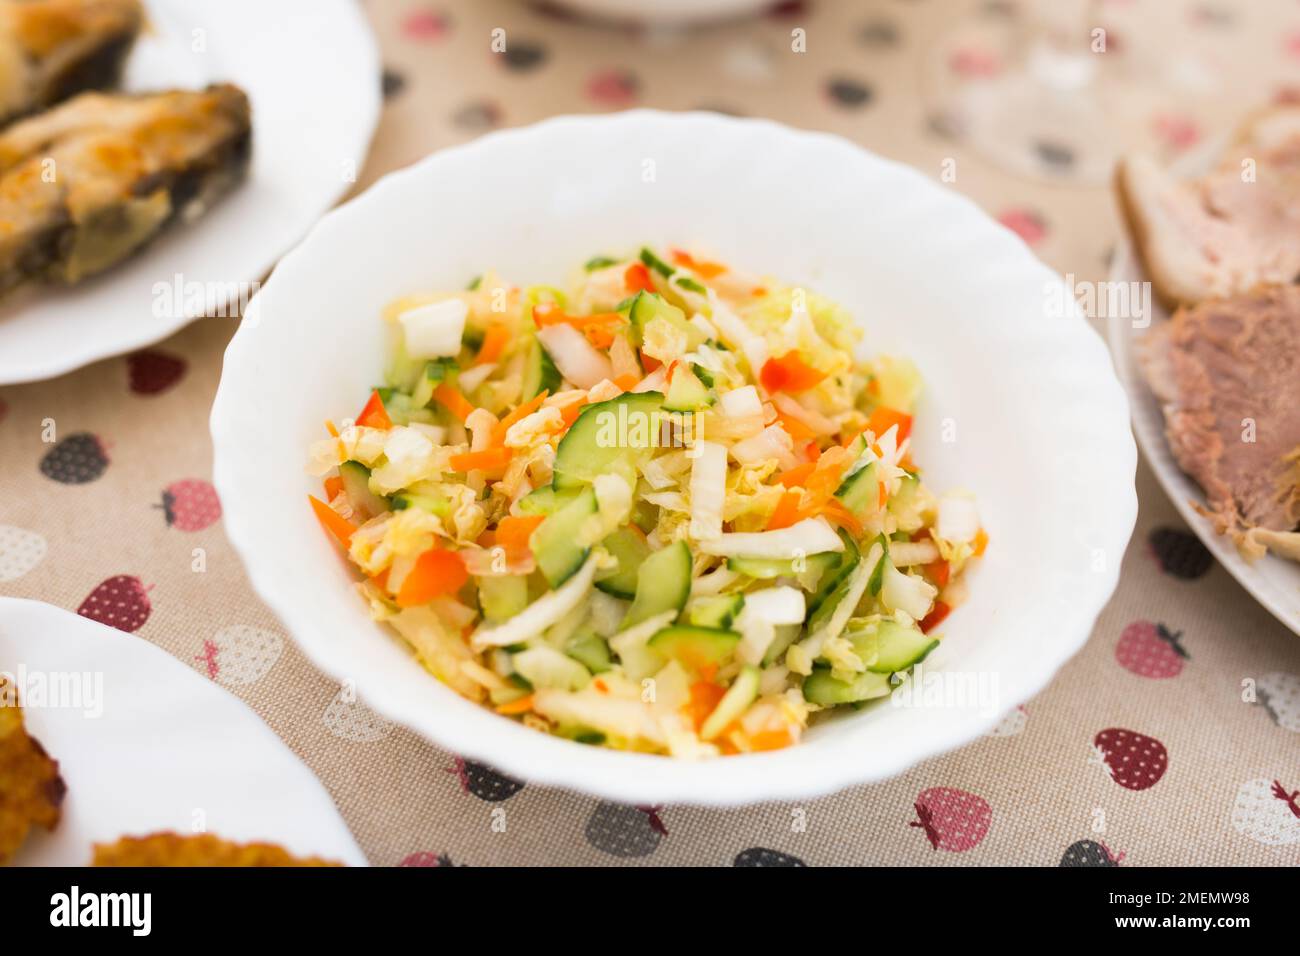 mix of vegetables. chopped cabbage, tomatoes, cucumbers, onions and greens in a bowl Stock Photo